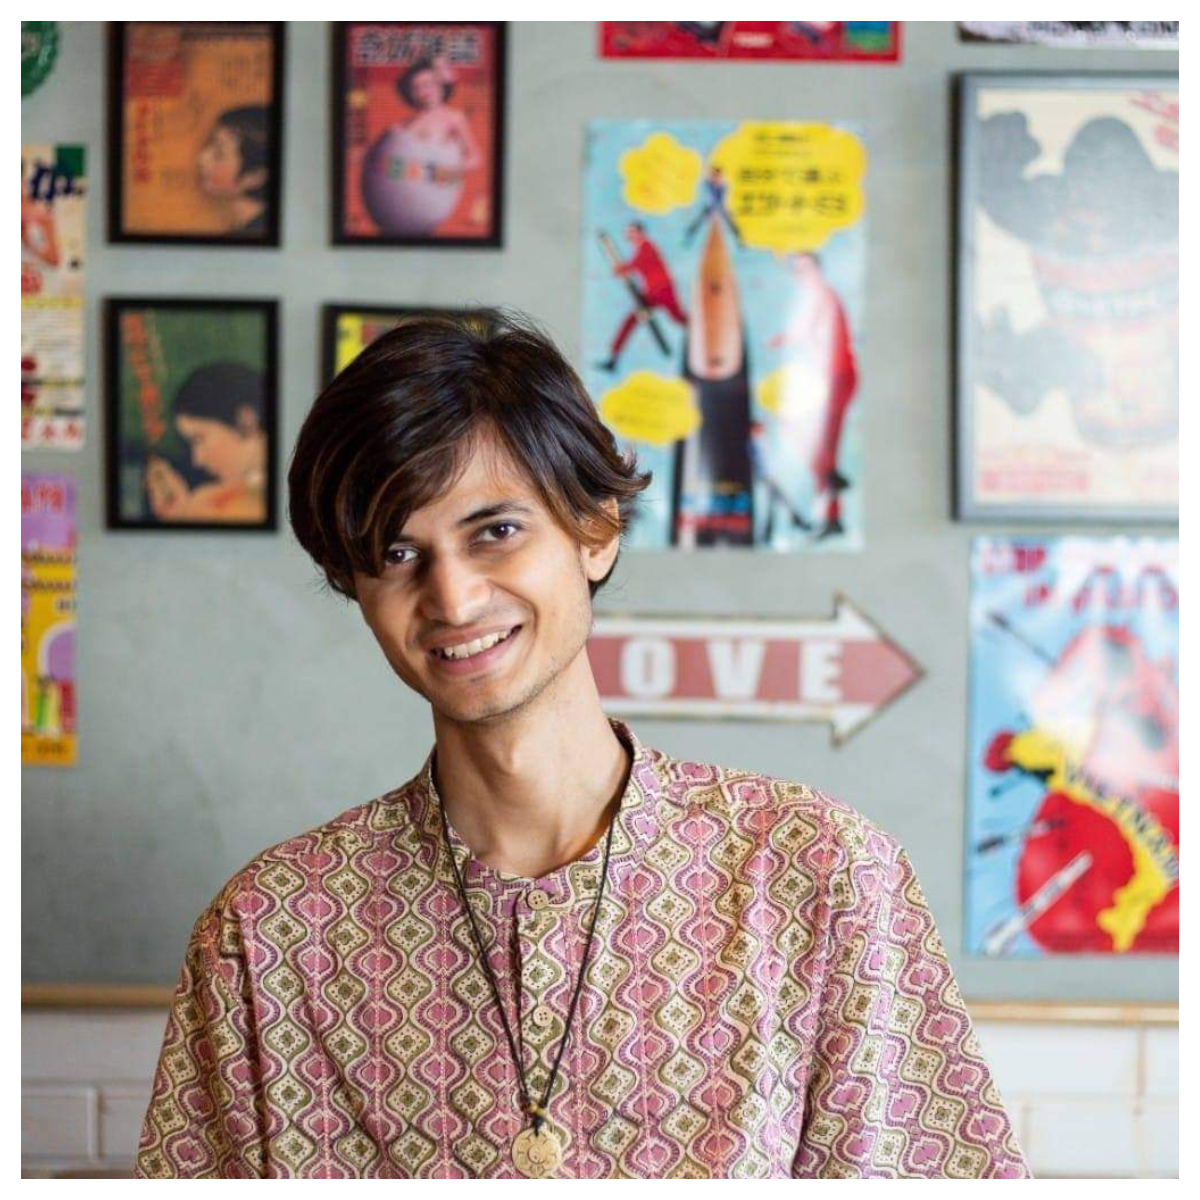 Colours of Courage: Aman Giri, a 23-year-old LGBTQ activist speaks of growing up gay and parental rejection